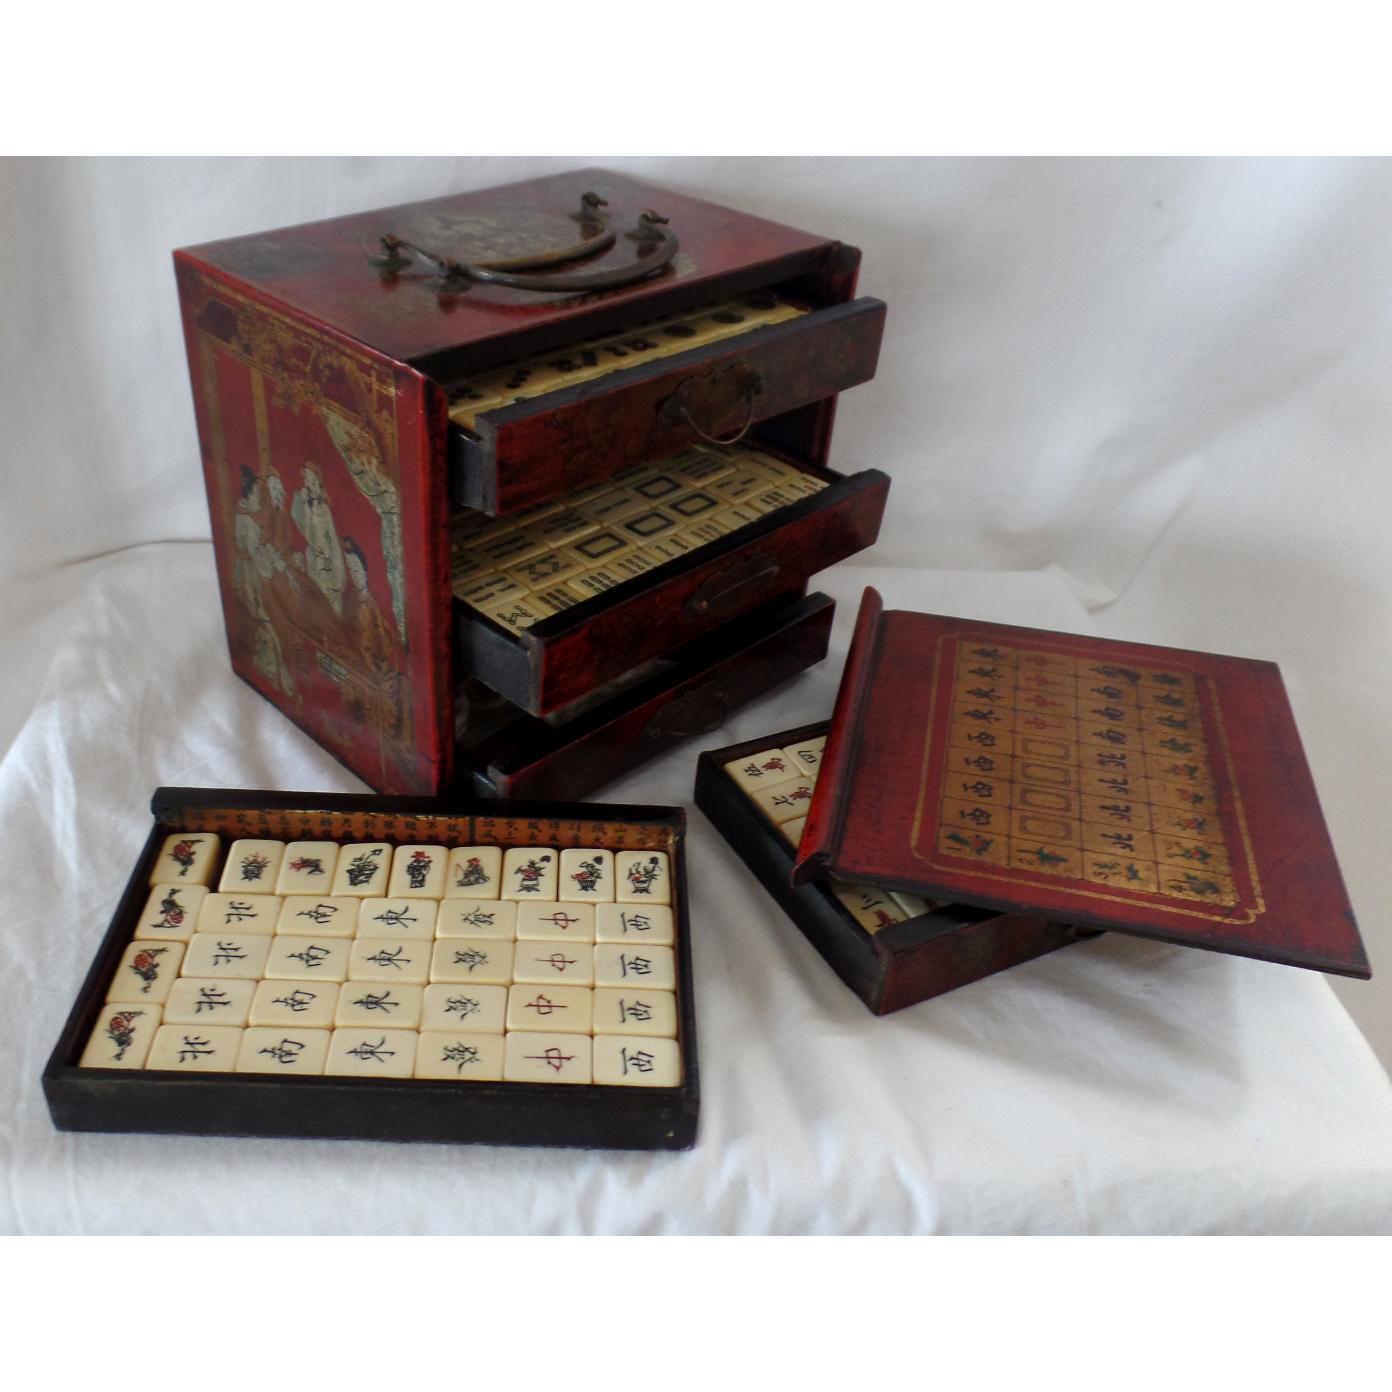 Vintage genuine beautiful antique complete set with all tiles.

Excellent condition. Box includes intricate designs including Goddess Guanyin (觀音), a beloved deity who is an all-seeing, all-hearing immortal being and the Goddess of Mercy.

Following